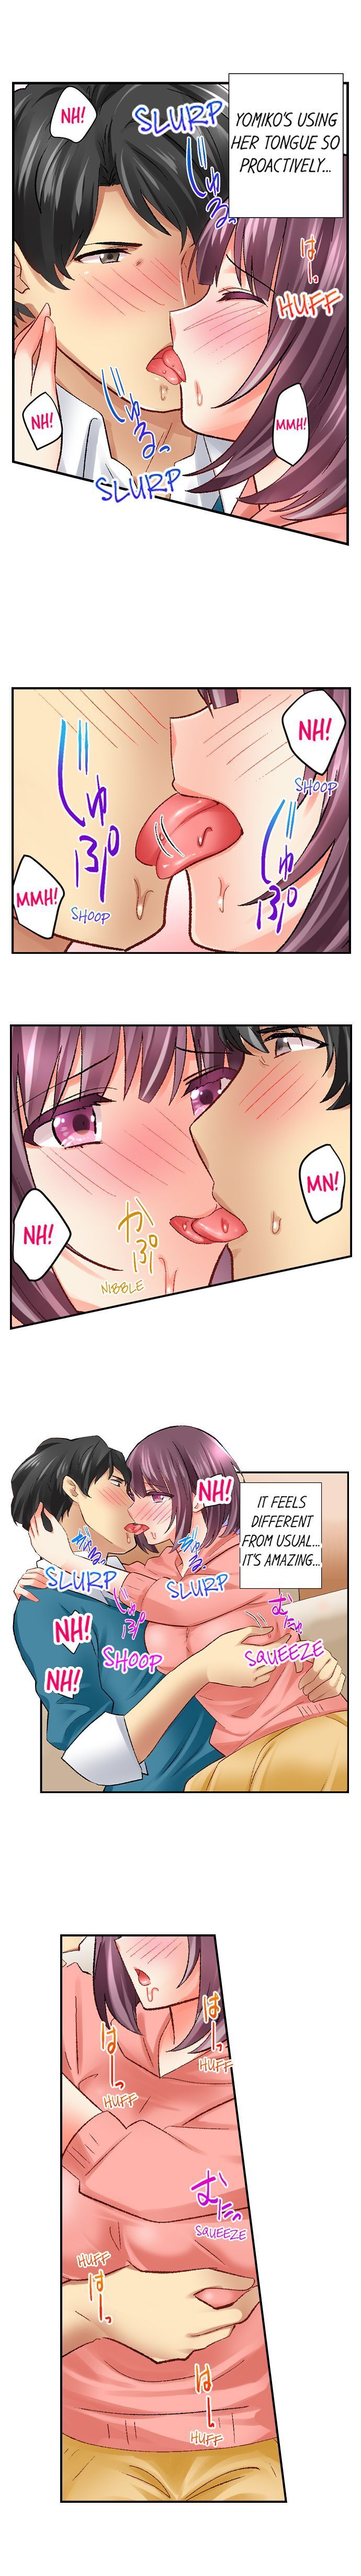 Our Kinky Newlywed Life - Chapter 38 Page 3